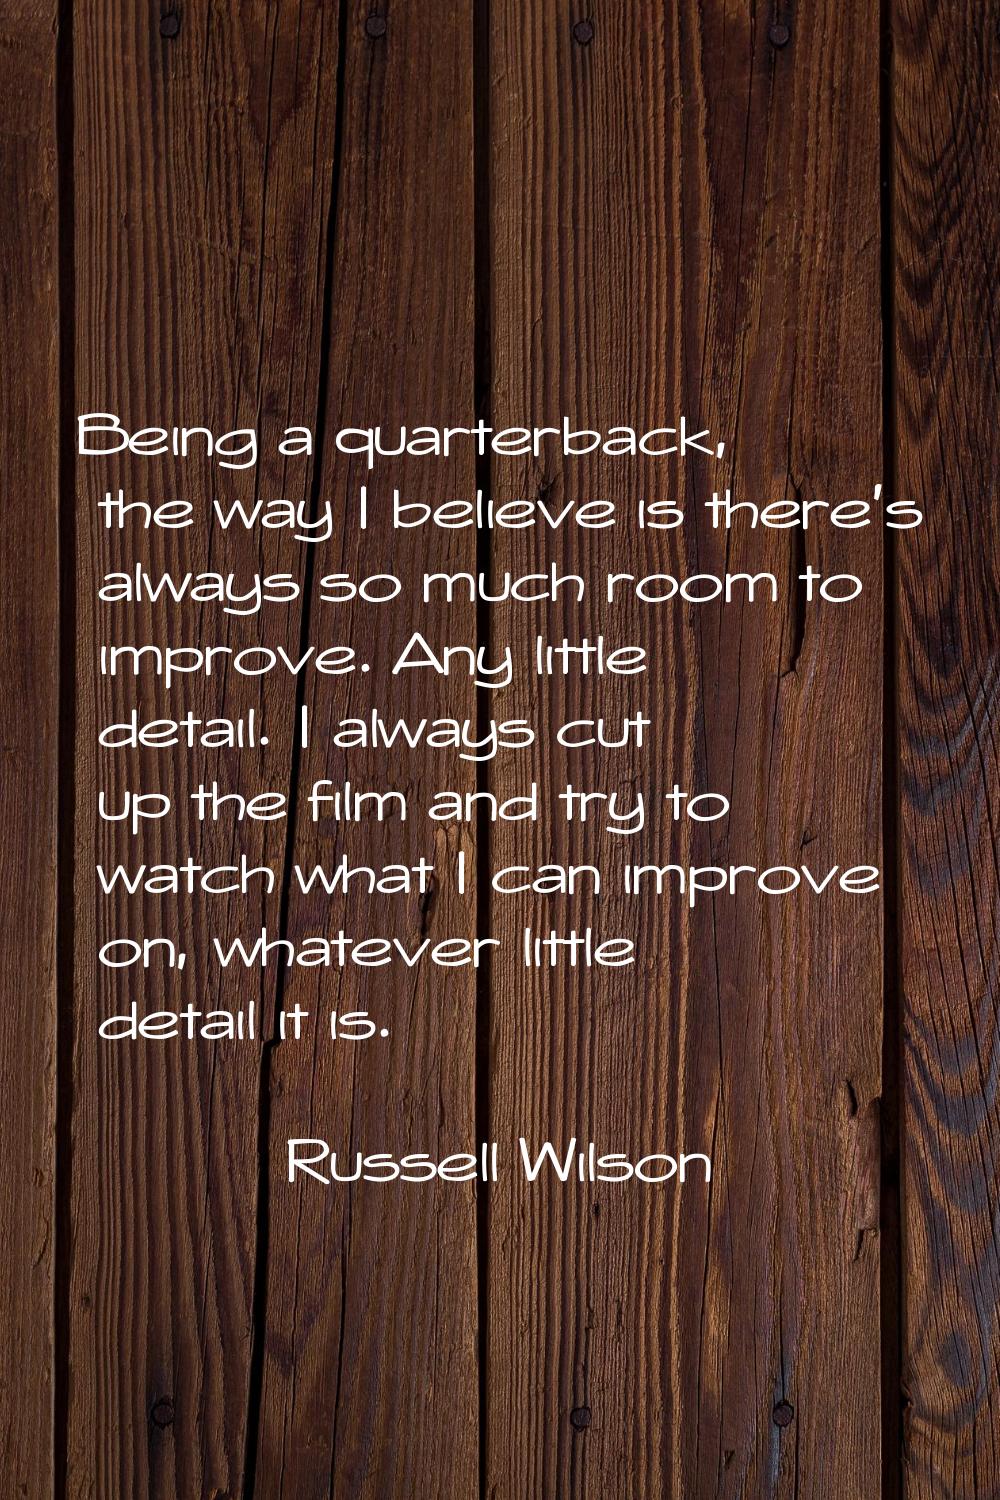 Being a quarterback, the way I believe is there's always so much room to improve. Any little detail